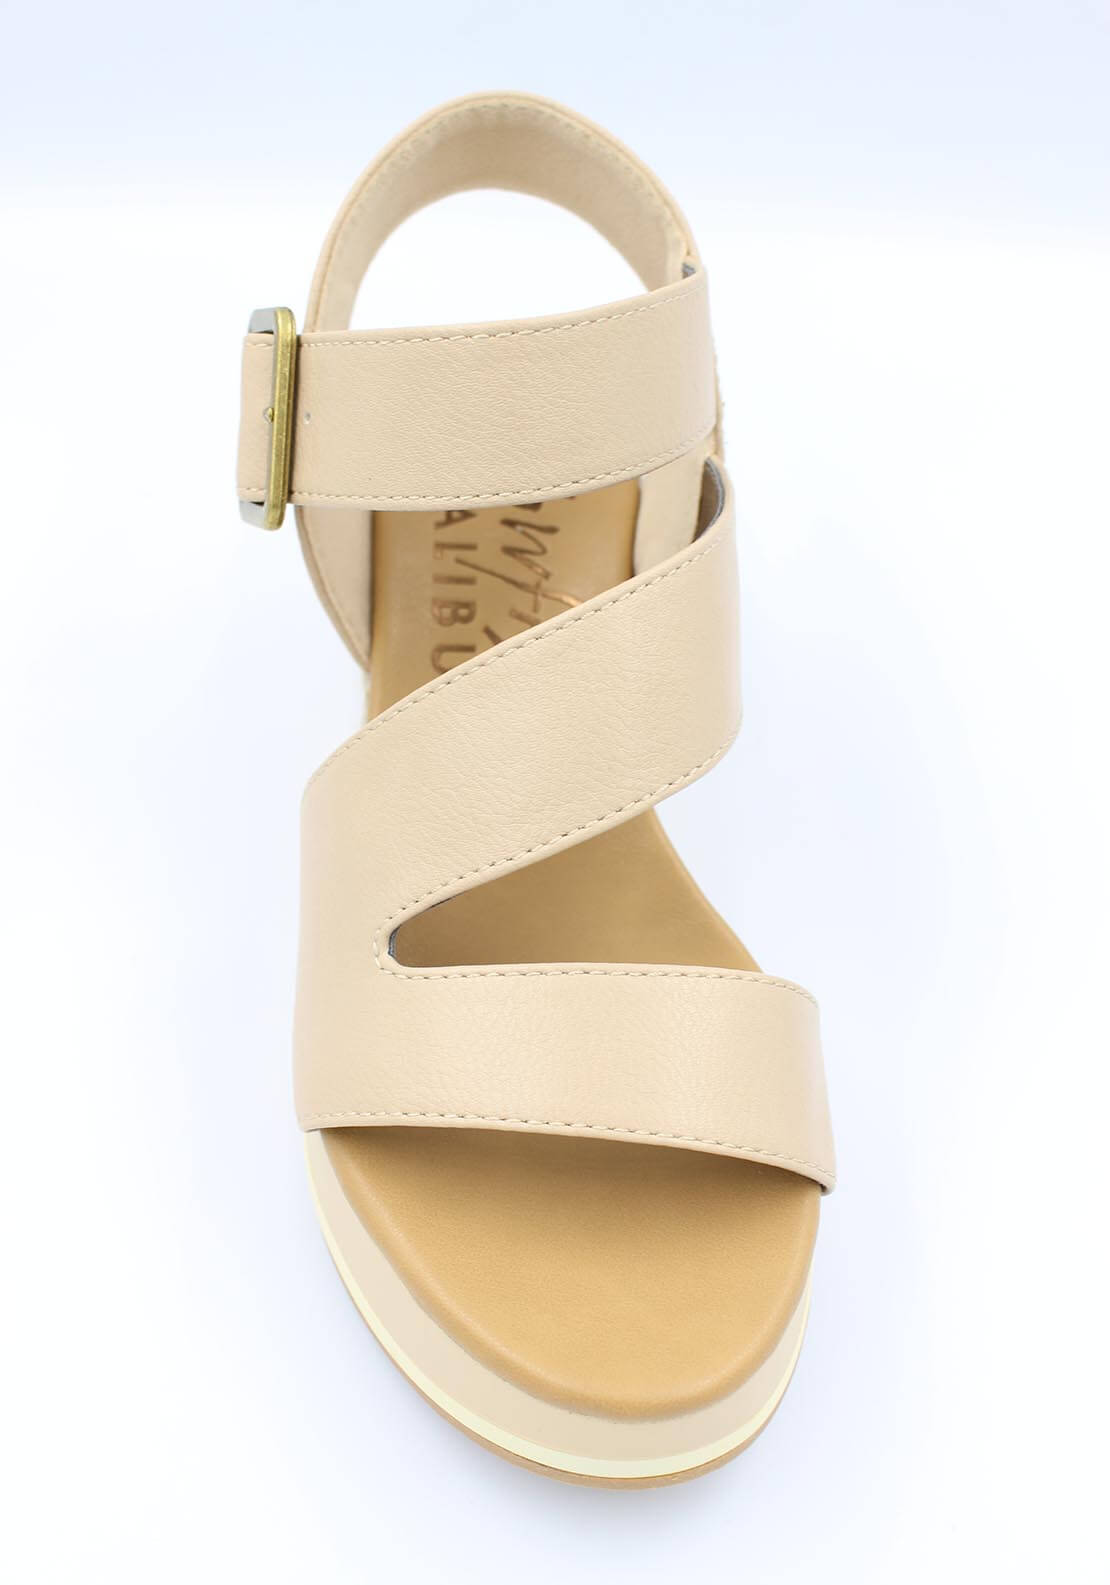 Blow Fish Solly Wedge Sandal 3 Shaws Department Stores